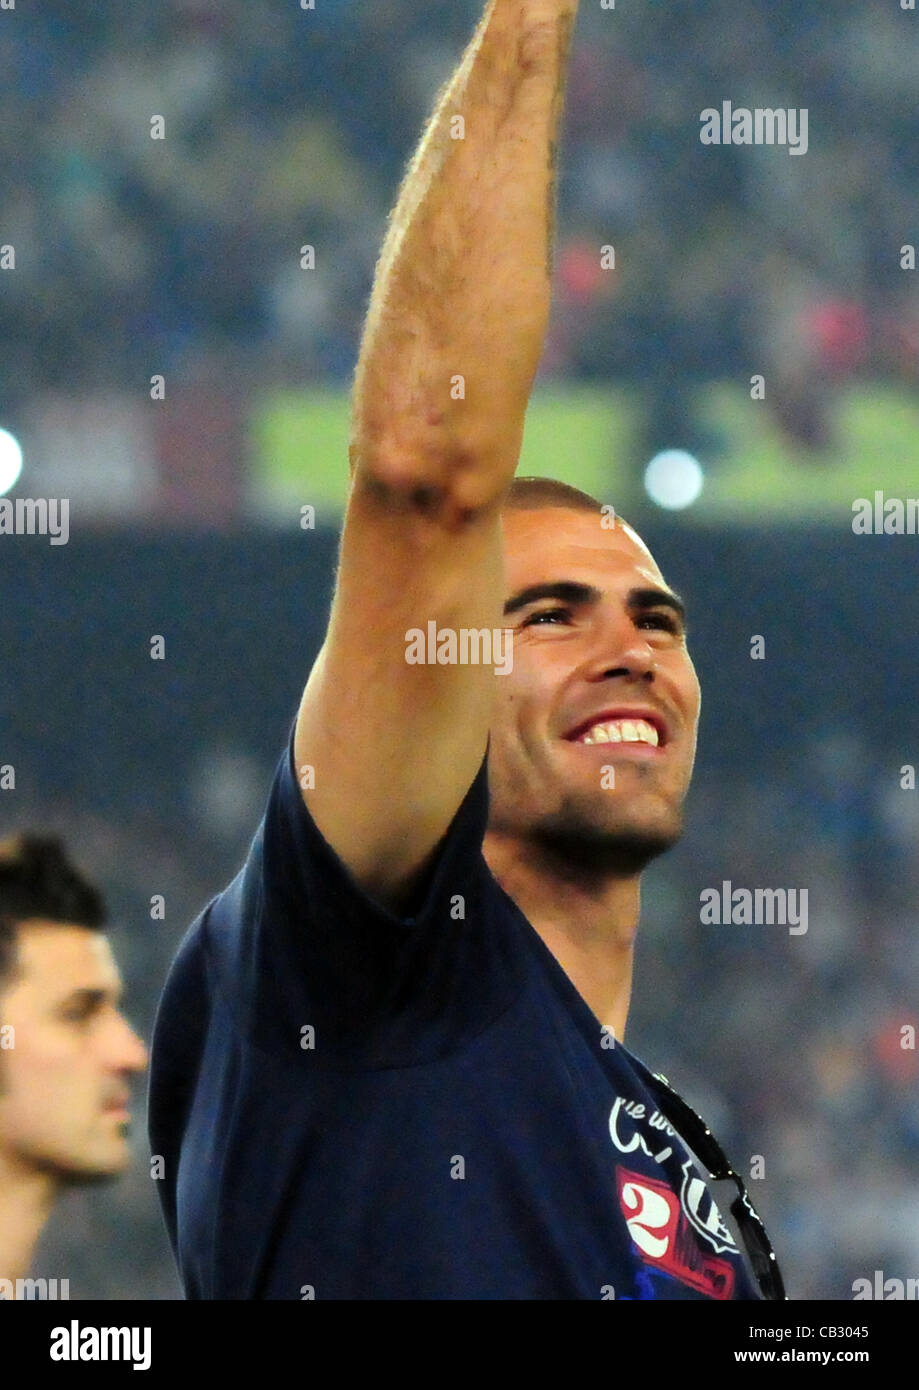 FC Barcelona trophy presentation to the fans (Barcelona, may 26 2012) Victor Valdes, captain an goalie of FC Barcelona, greets the fans. Stock Photo